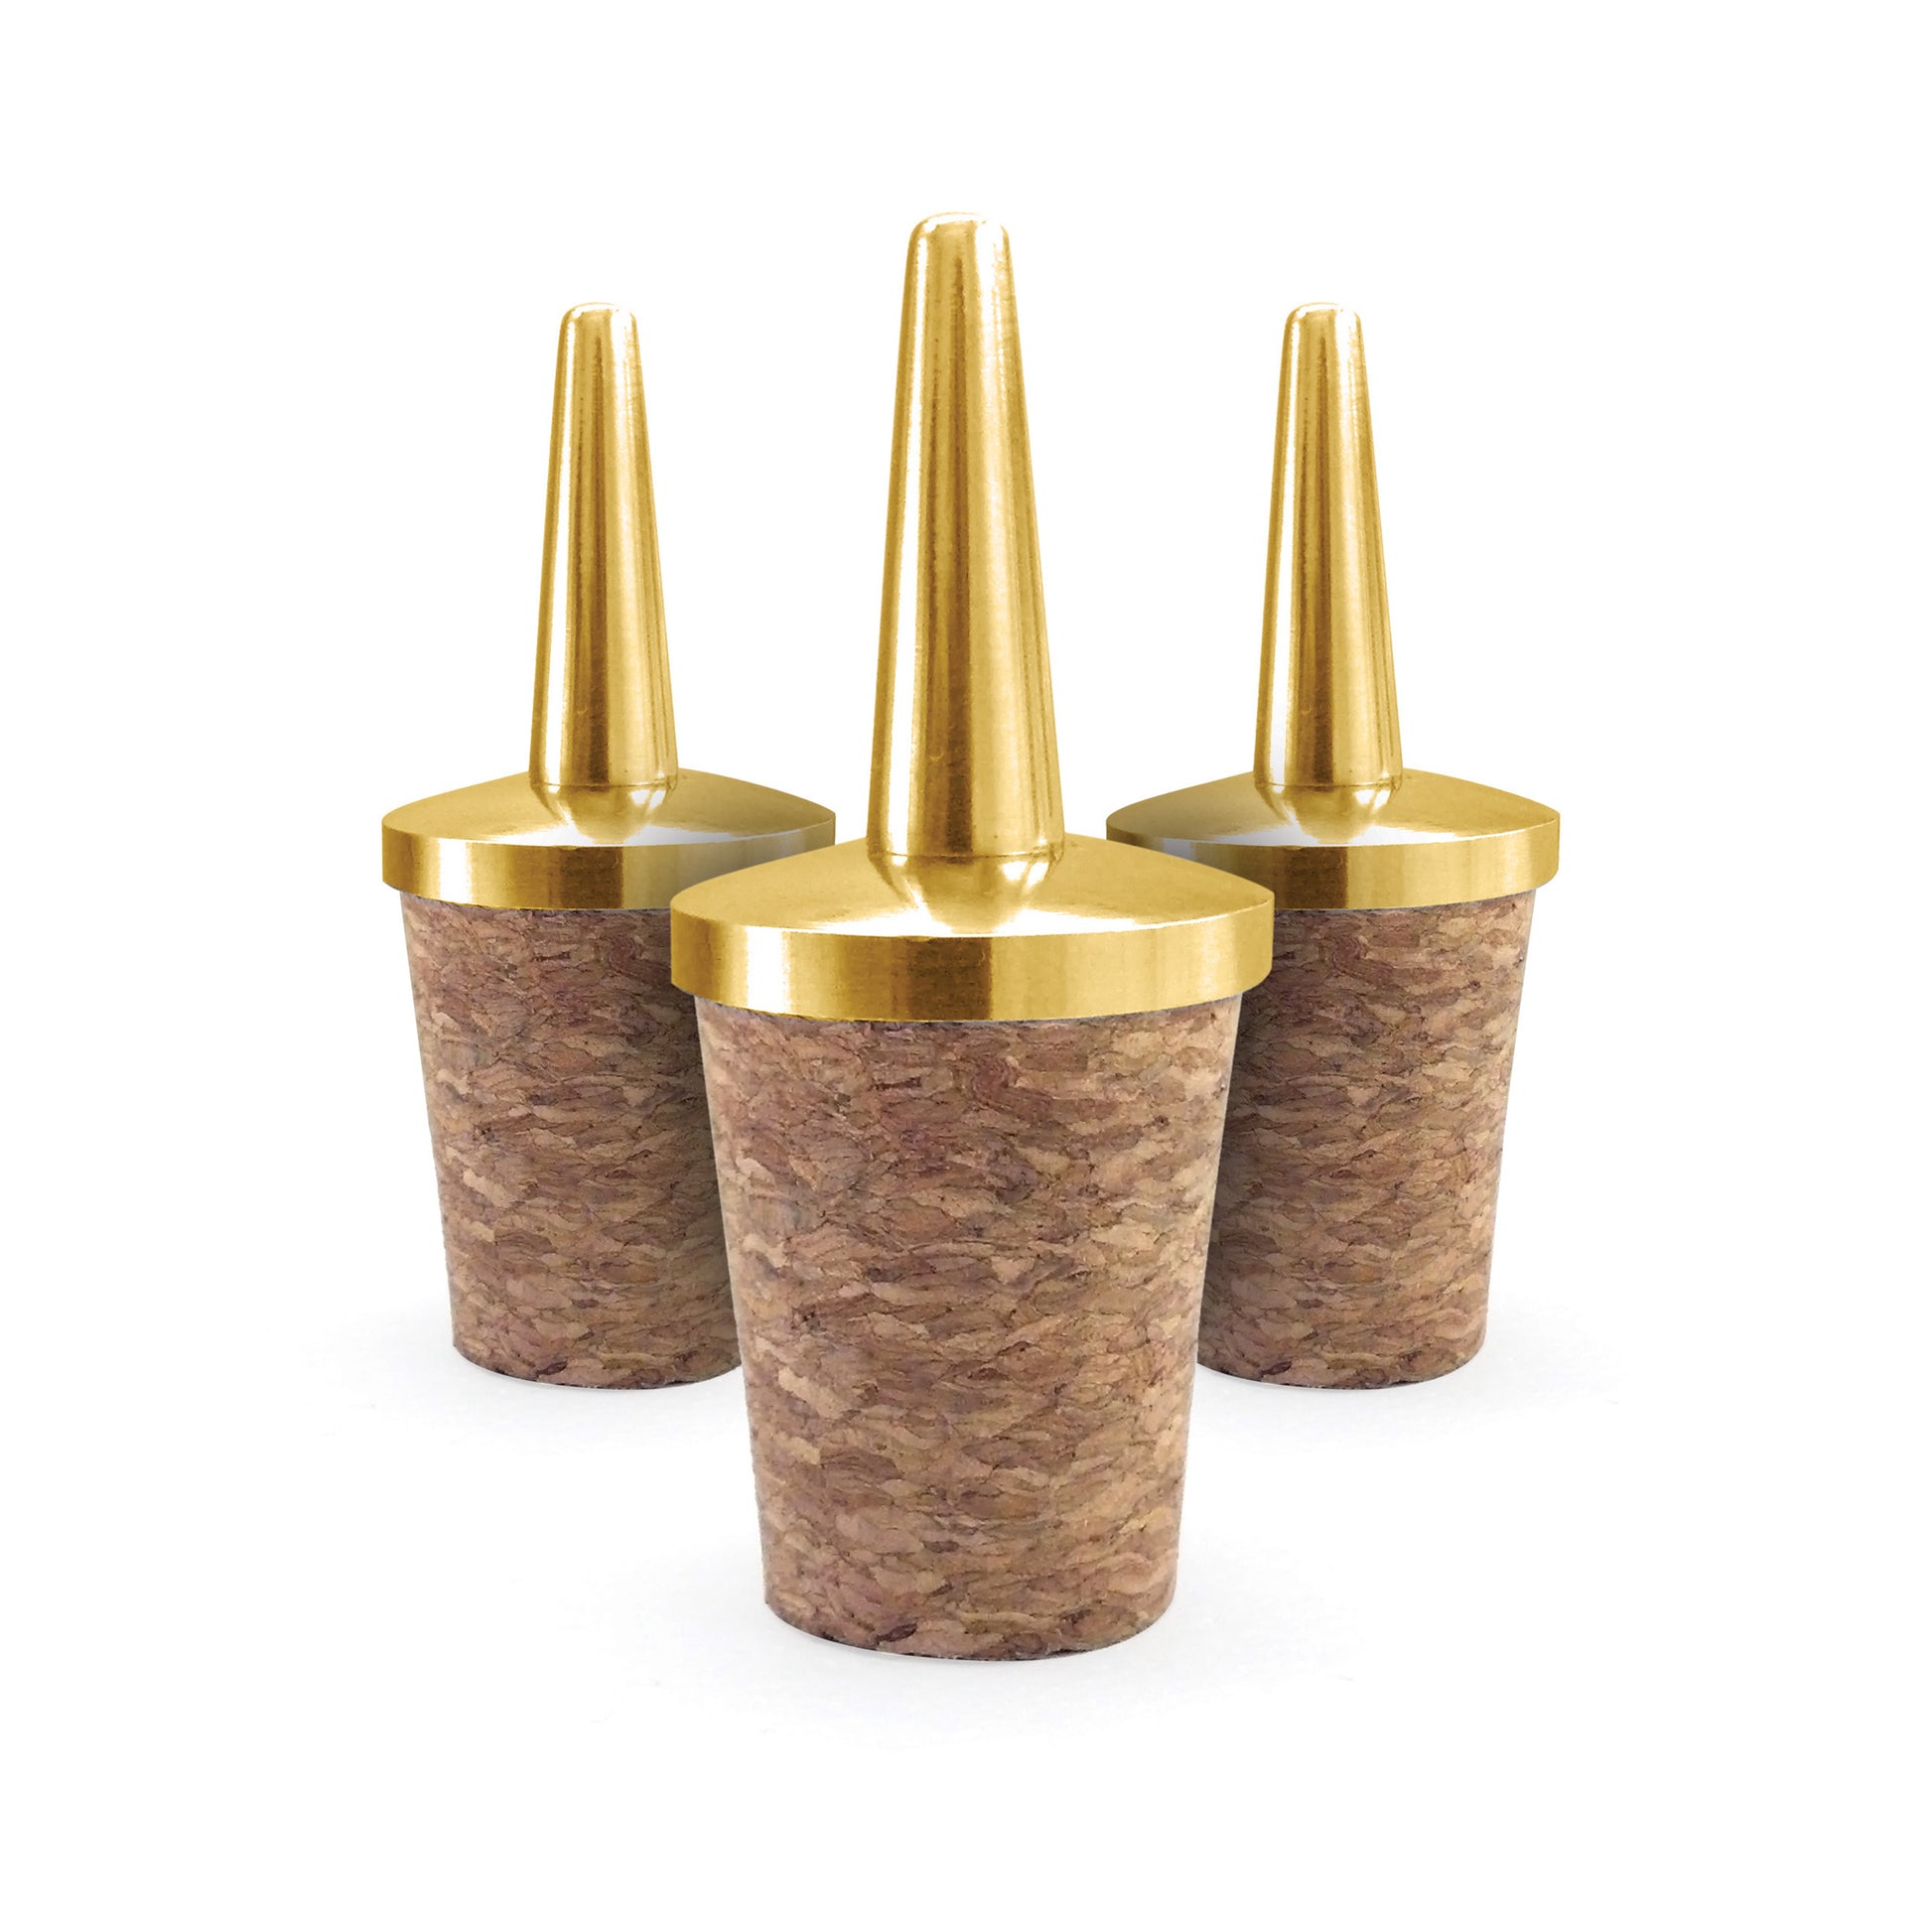 DASHER TOP – GOLD-PLATED / PACK OF 3